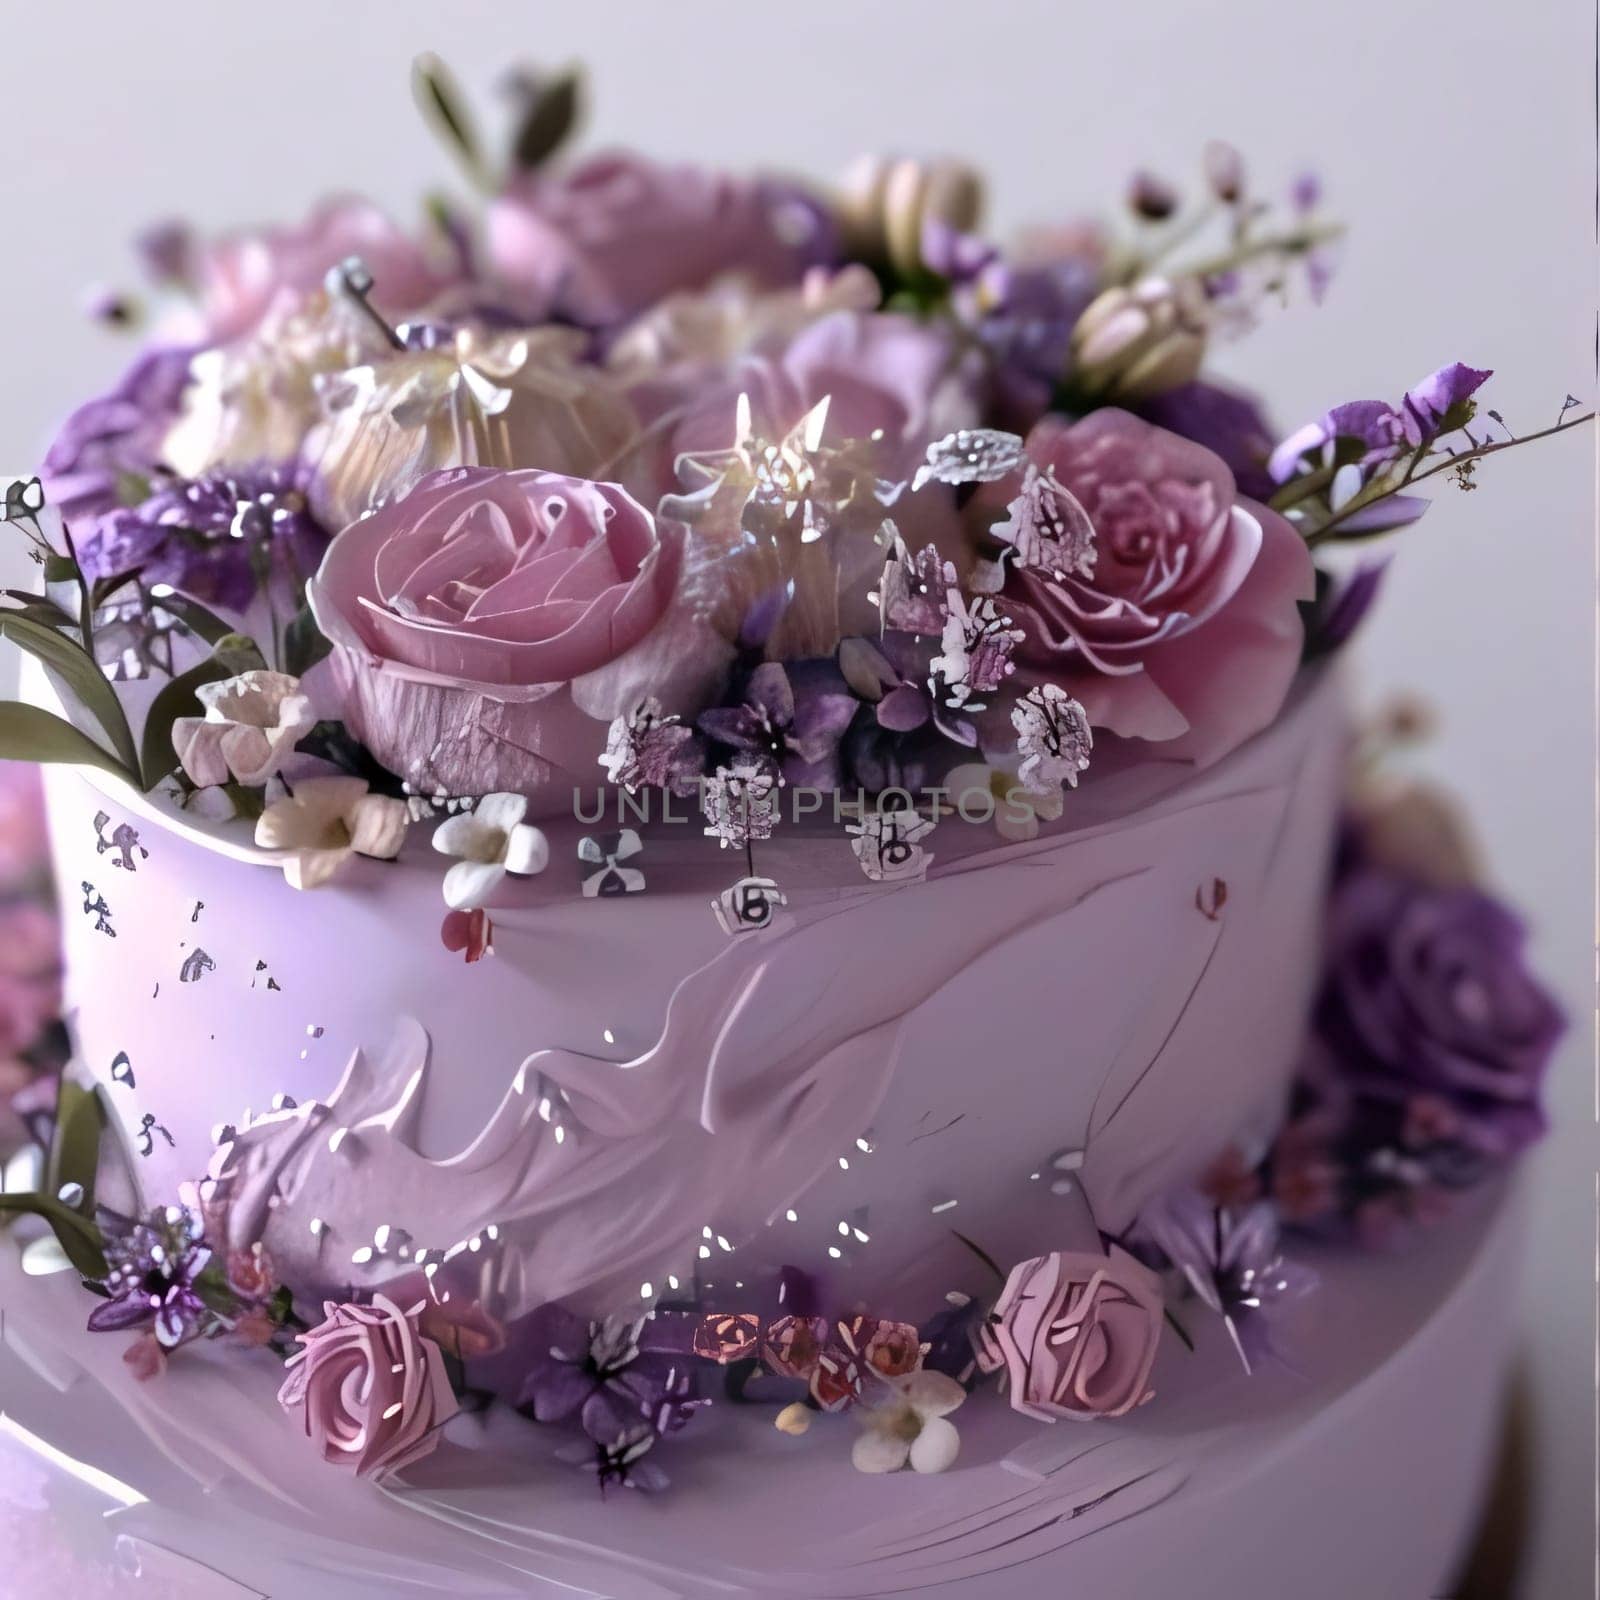 Cake with purple and white petal flowers. Flowering flowers, a symbol of spring, new life. A joyful time of nature waking up to life.